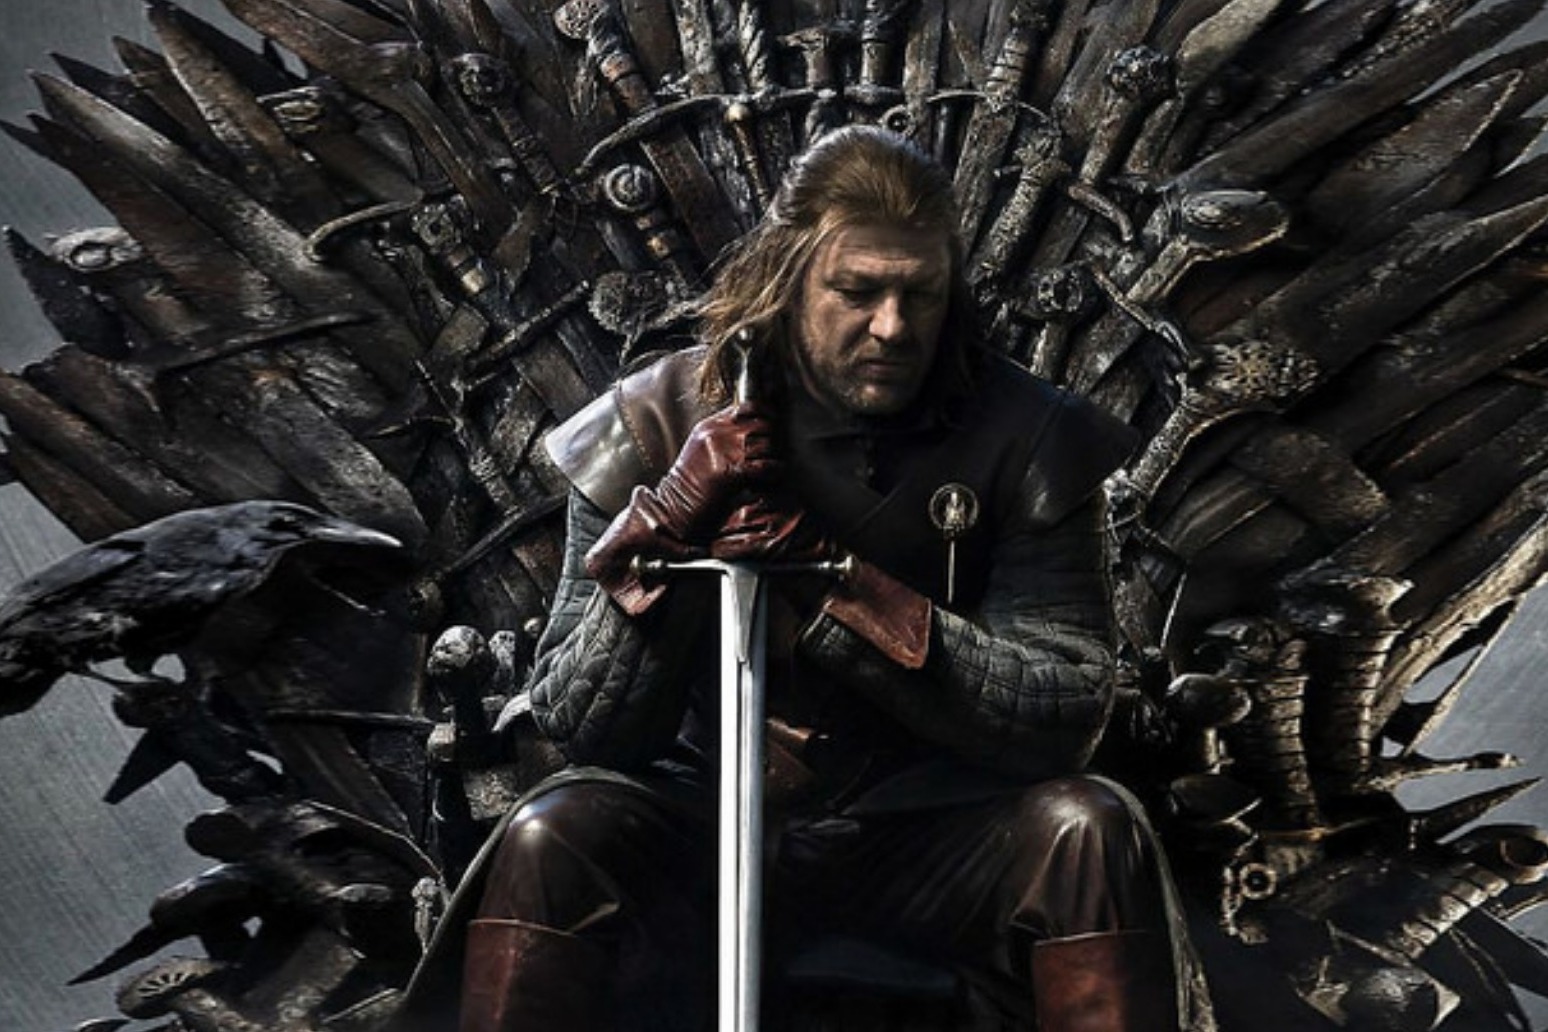 Game of Thrones leads the way in the Emmy nominations with 22 